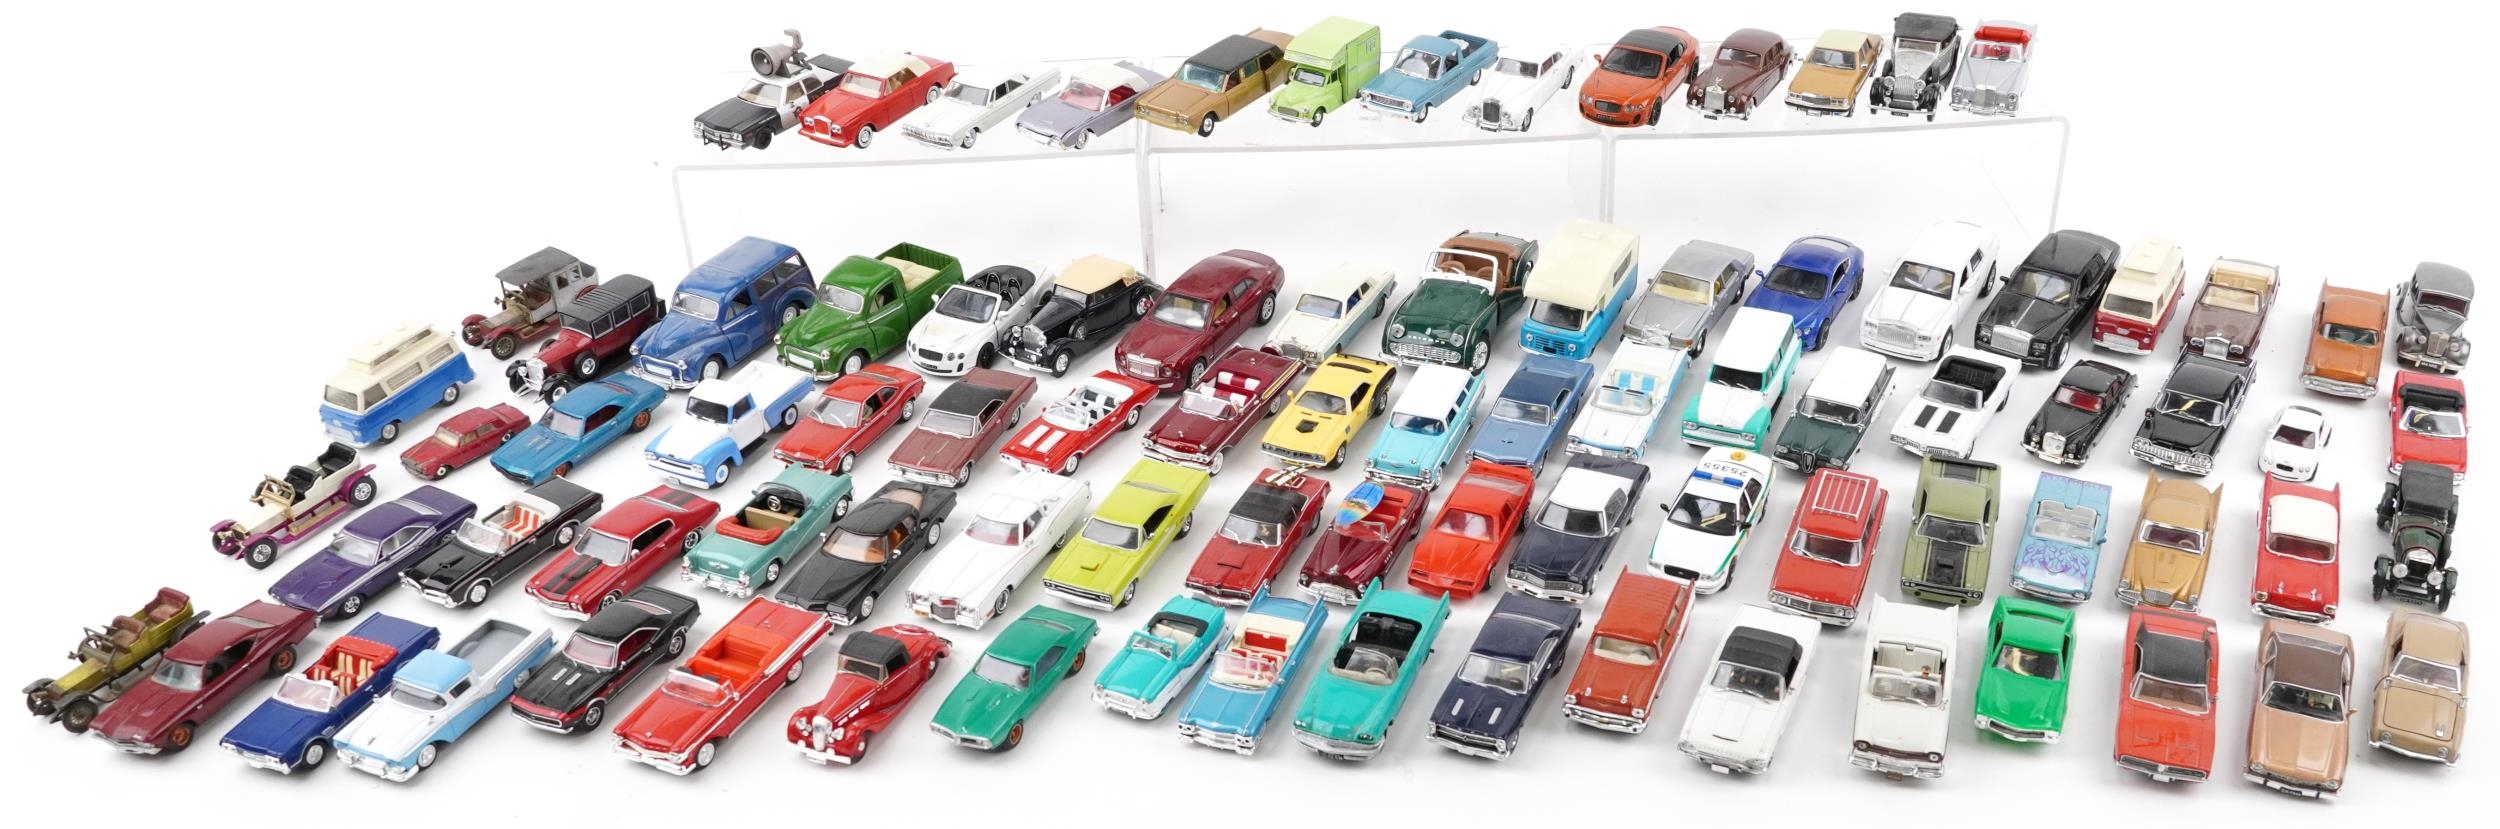 Large collection of vintage and later diecast vehicles including Corgi, Matchbox, Solido and Del